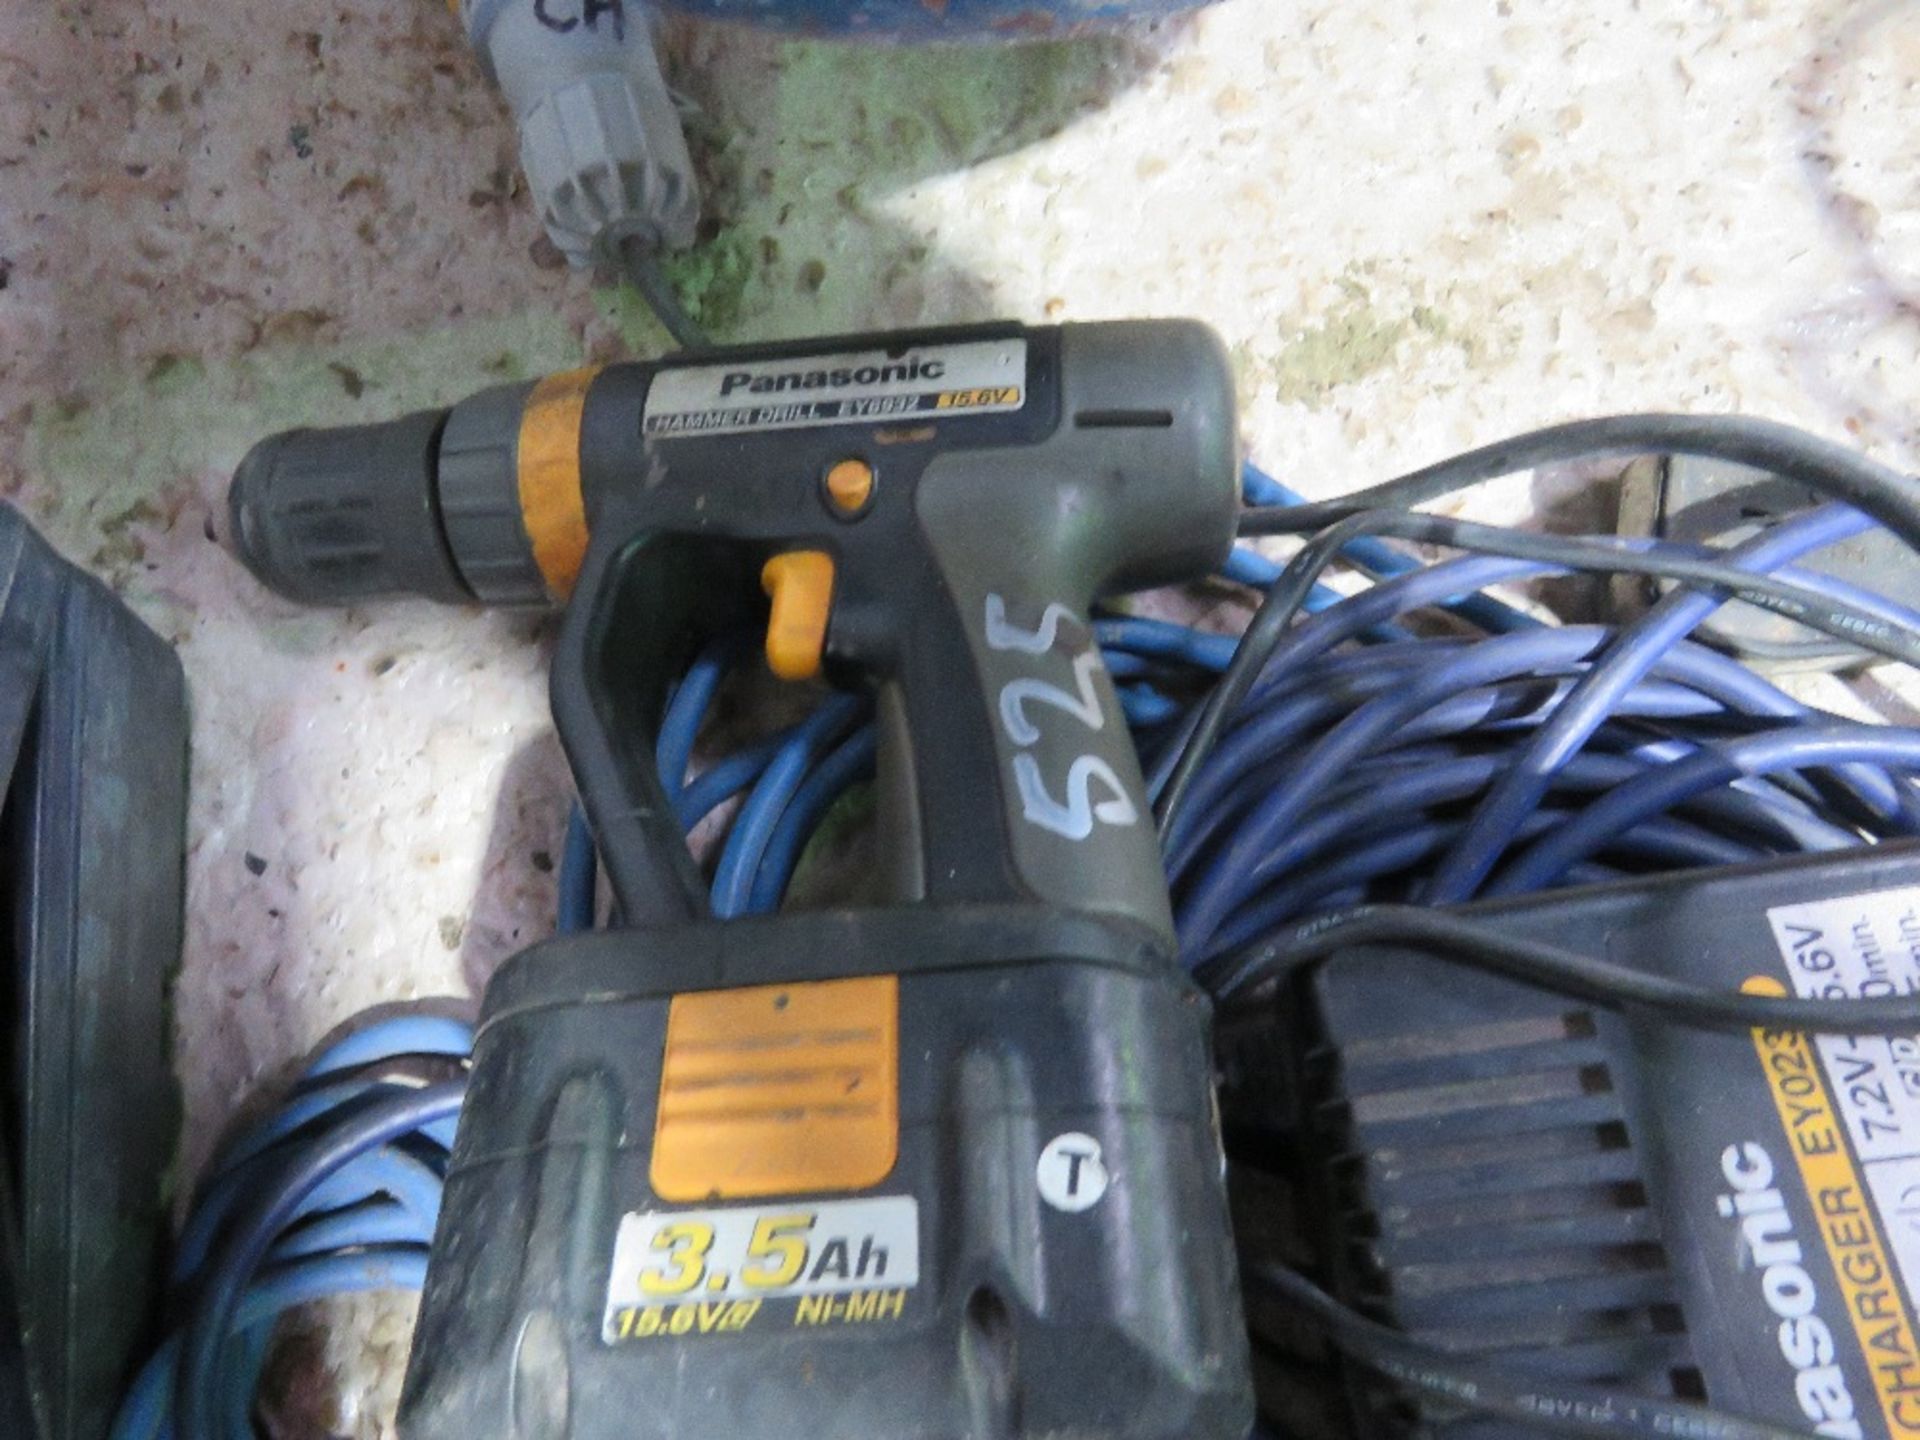 DEWALT HAND ROUTER , SDS DRILL, PLUS 2 X EXTENSION LAEDS AND A CORDLESS DRILL. THIS LOT IS SOLD - Image 6 of 8